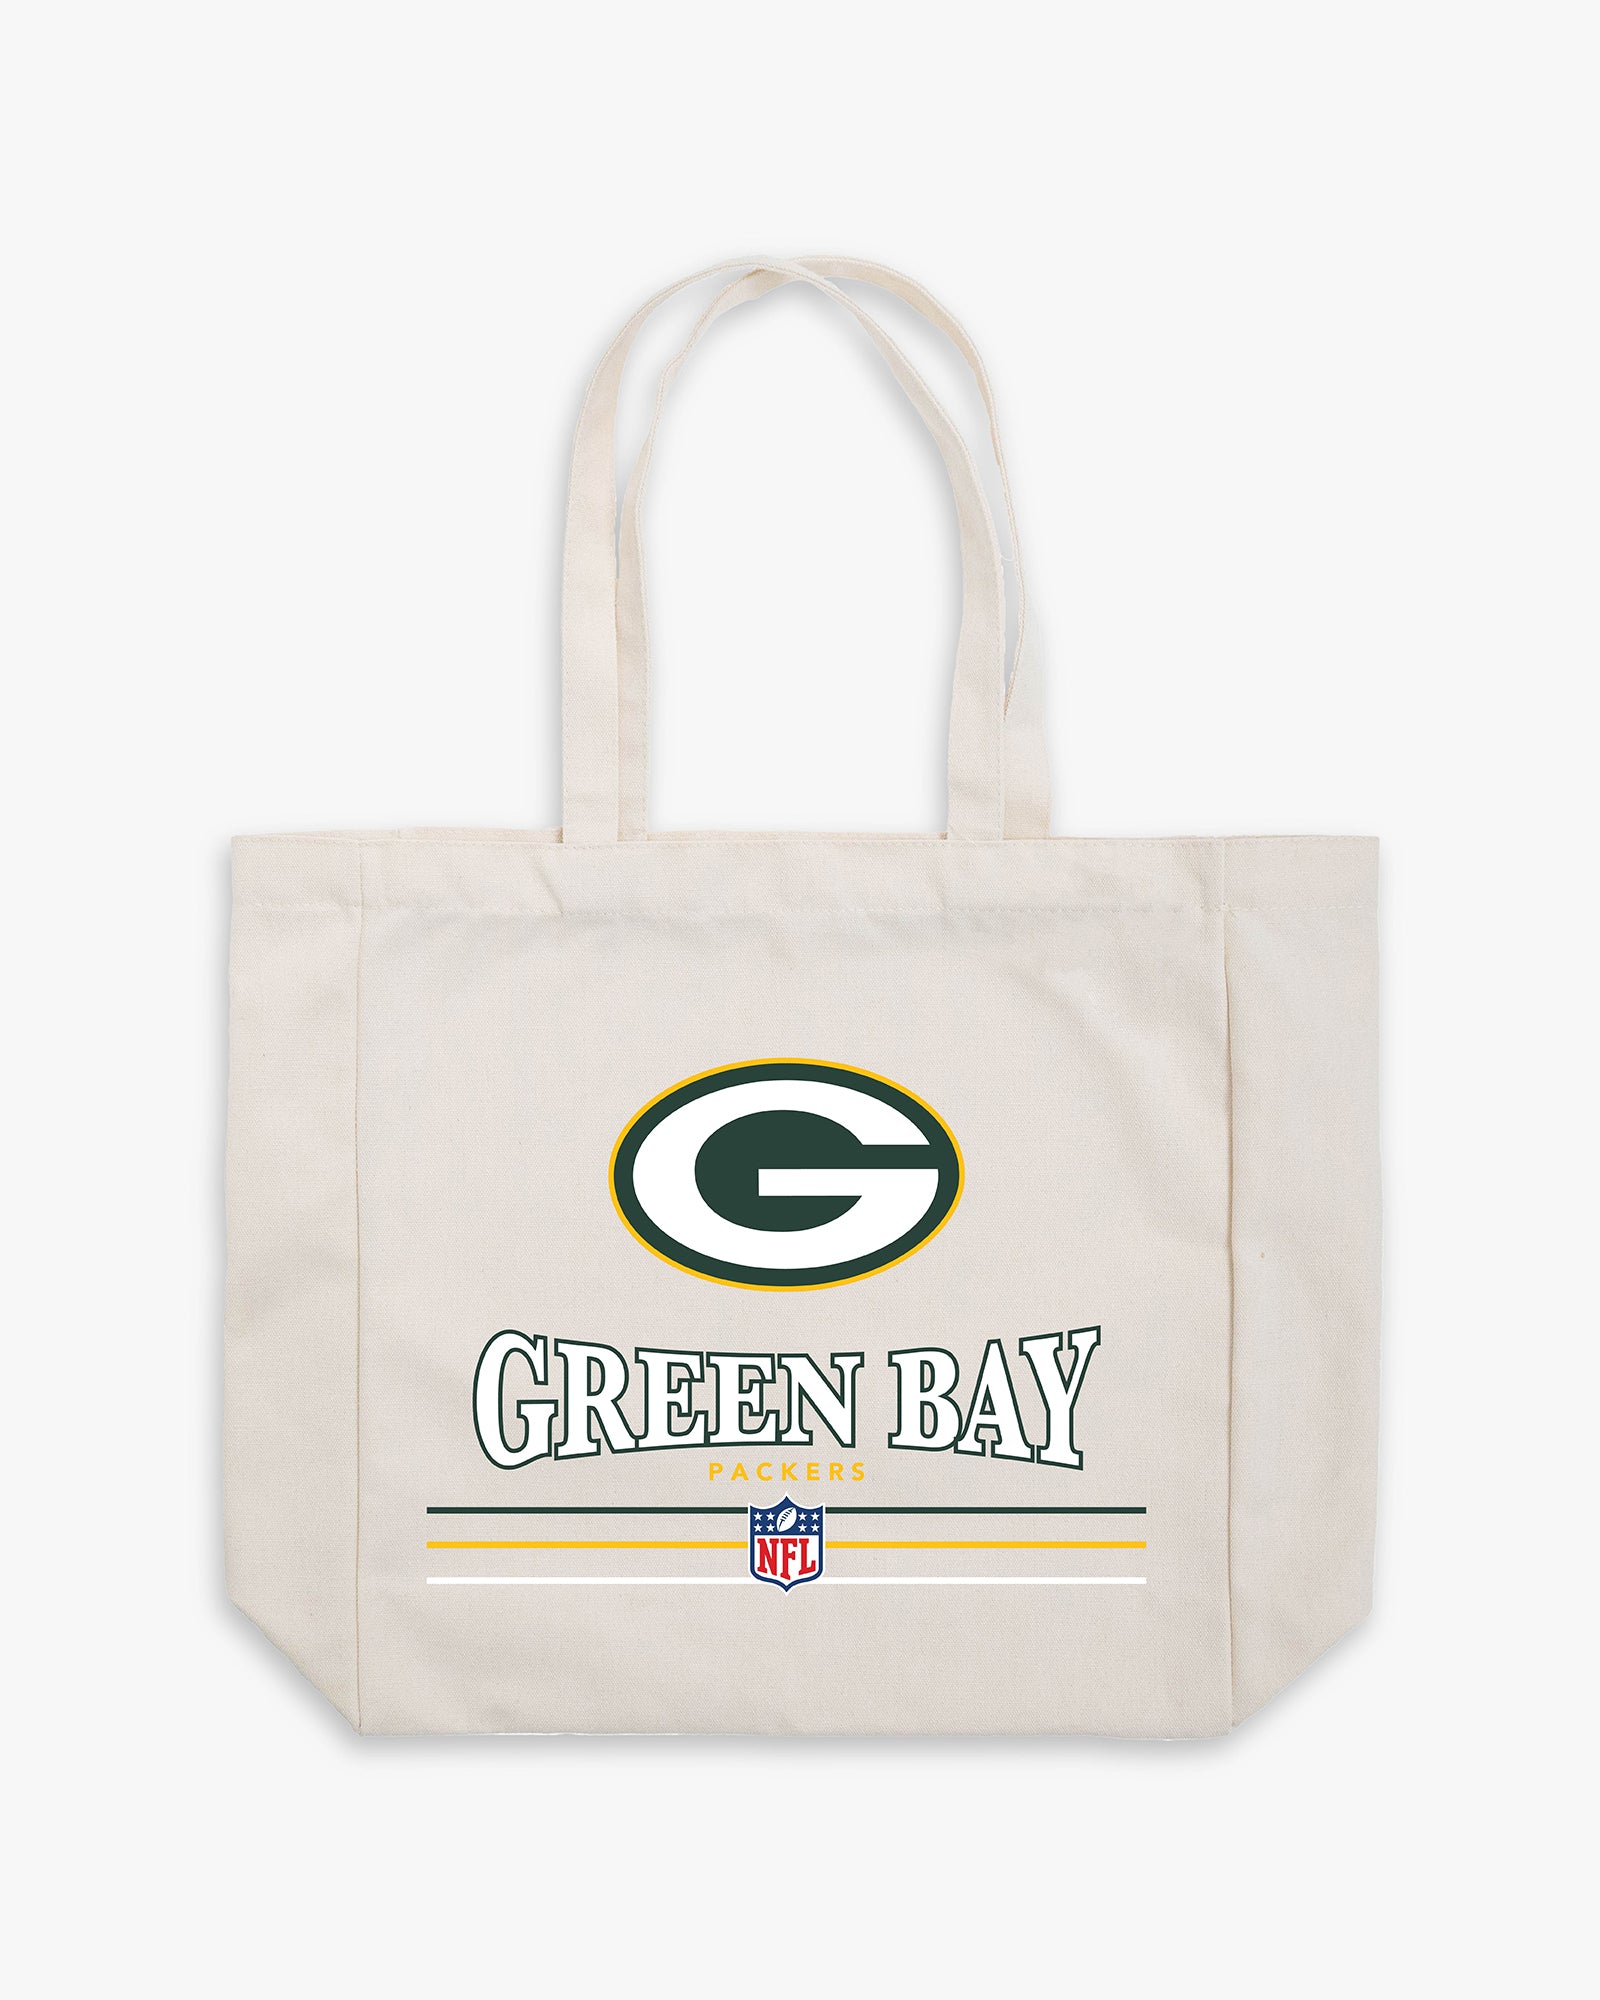 Gertex Green Bay Packers NFL Canvas Tote Bag